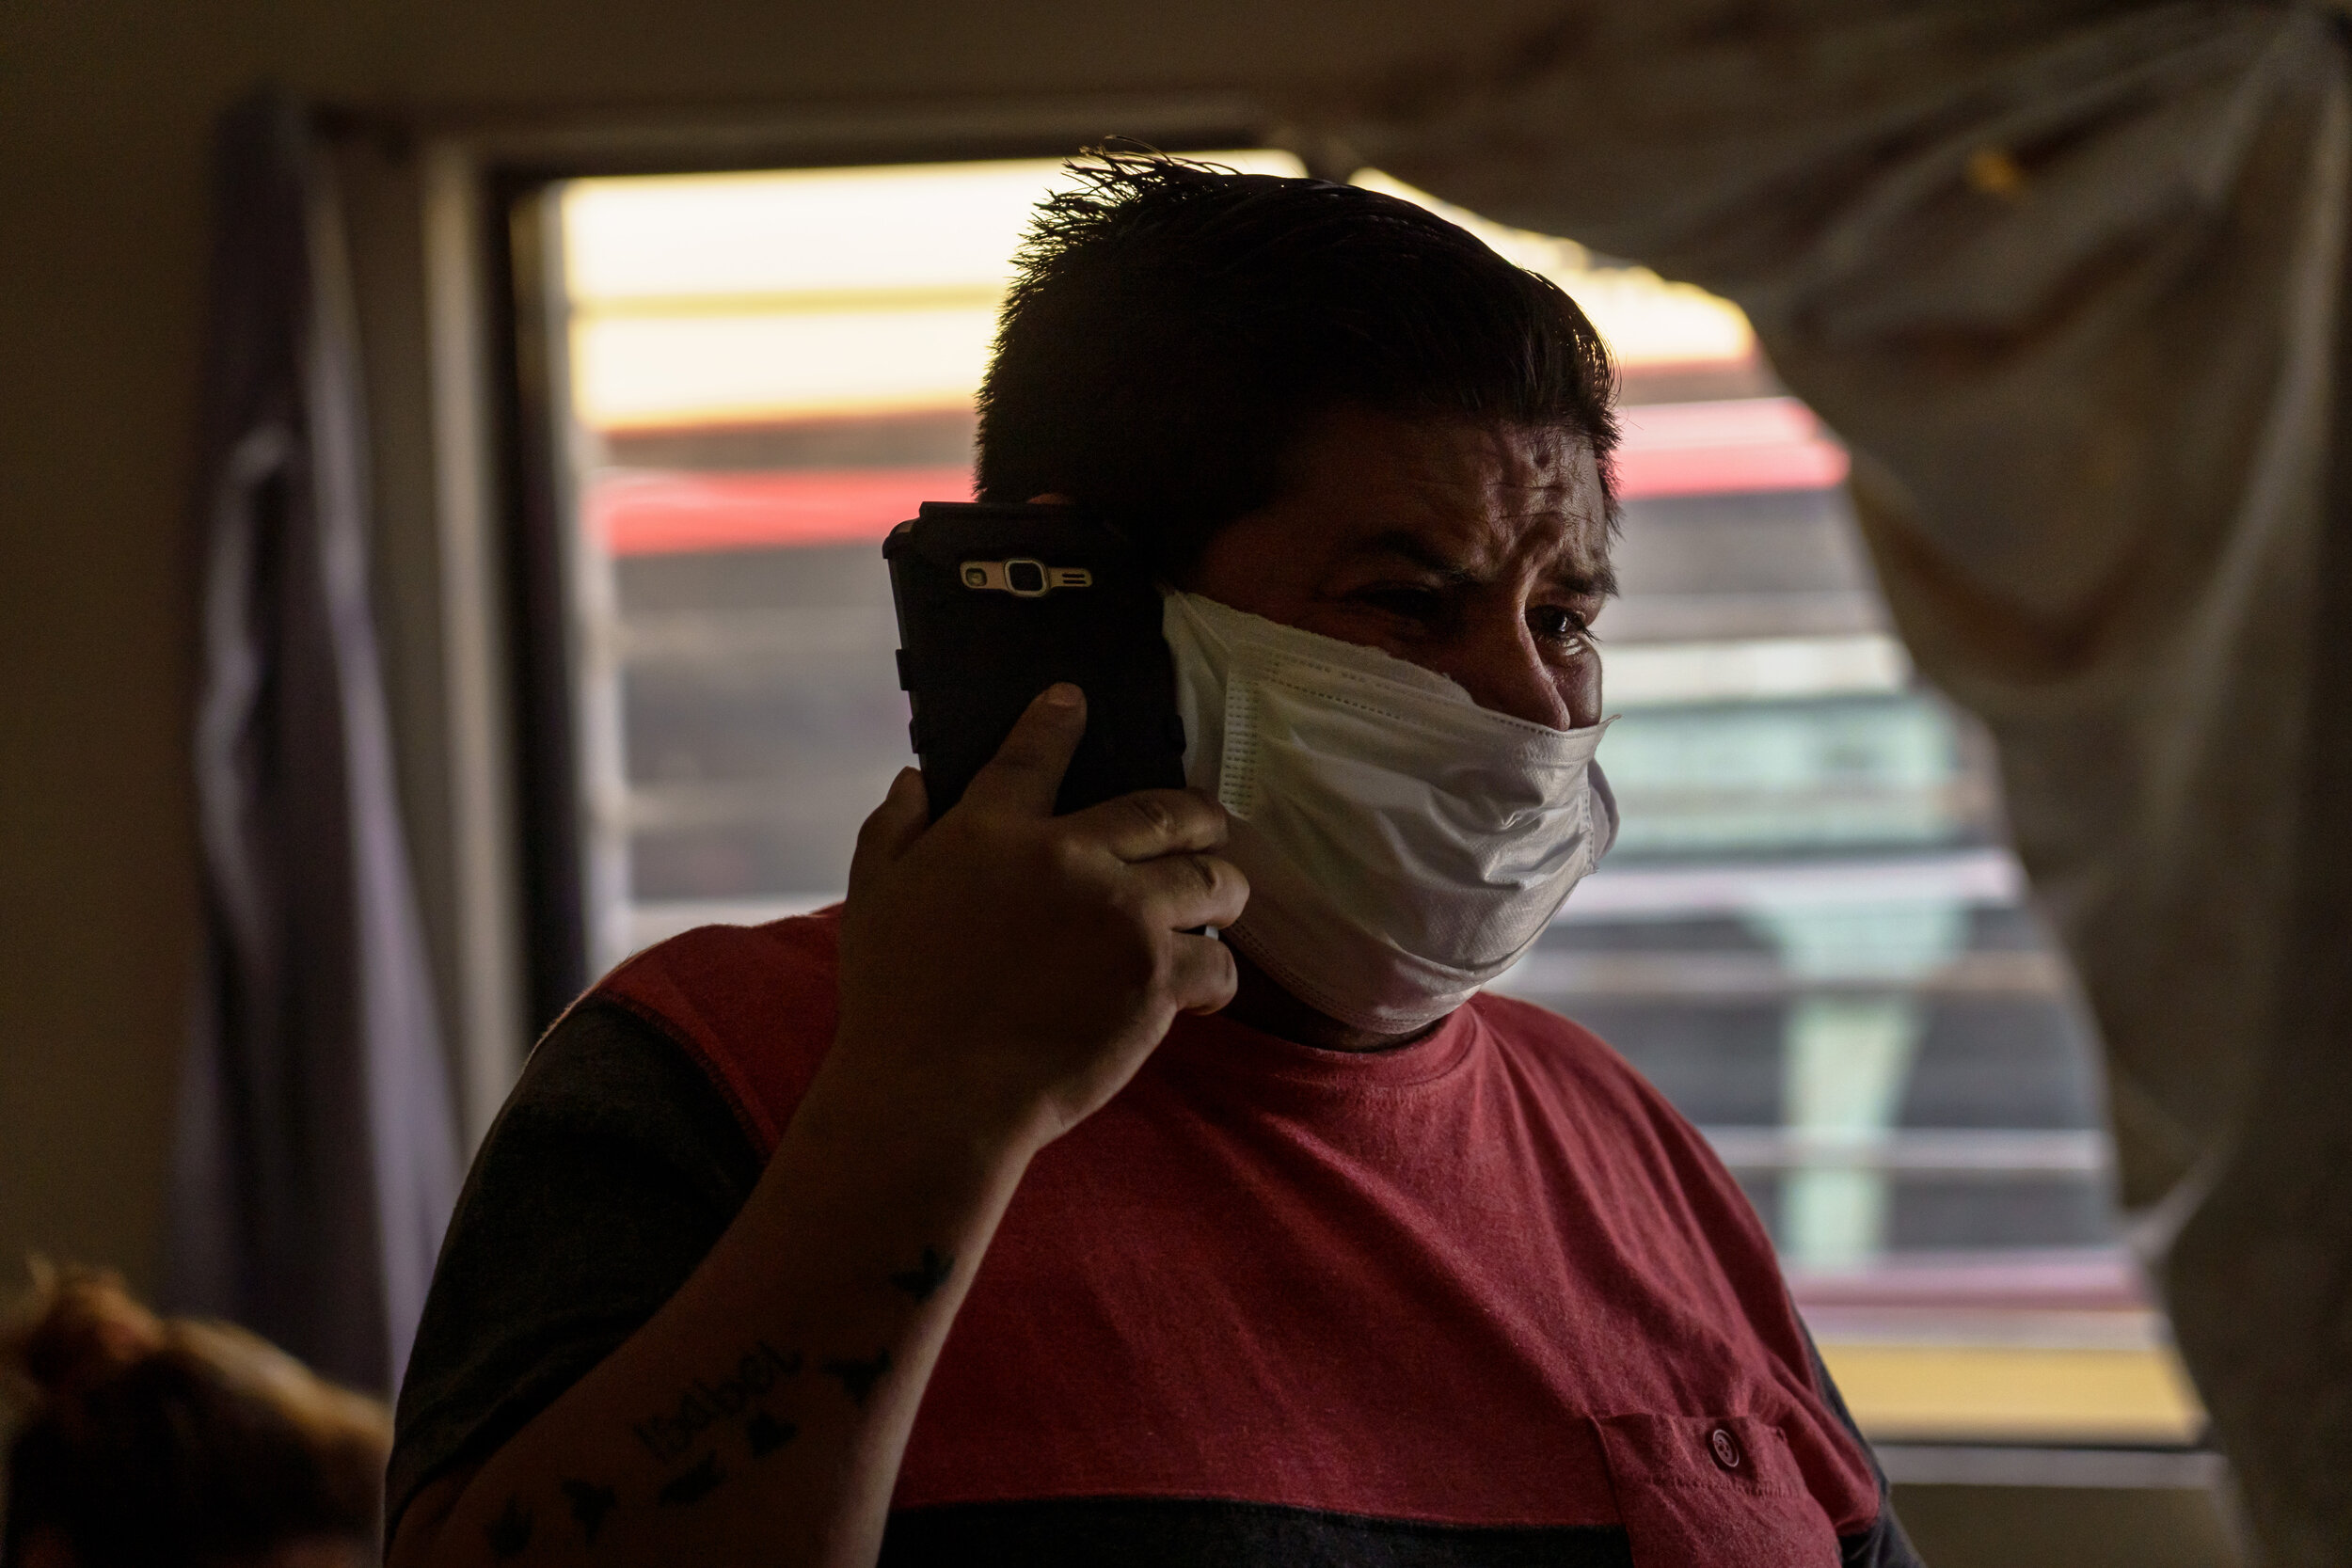  Guillermo Dionisio Molina, tears up as he talks on the phone and watches the Red Cross paramedics transport his brother, Eduardo Dionisio Molina, 41, who has symptoms related to COVID-19, to a nearby hospital from their home in the Pobladoejido Mata